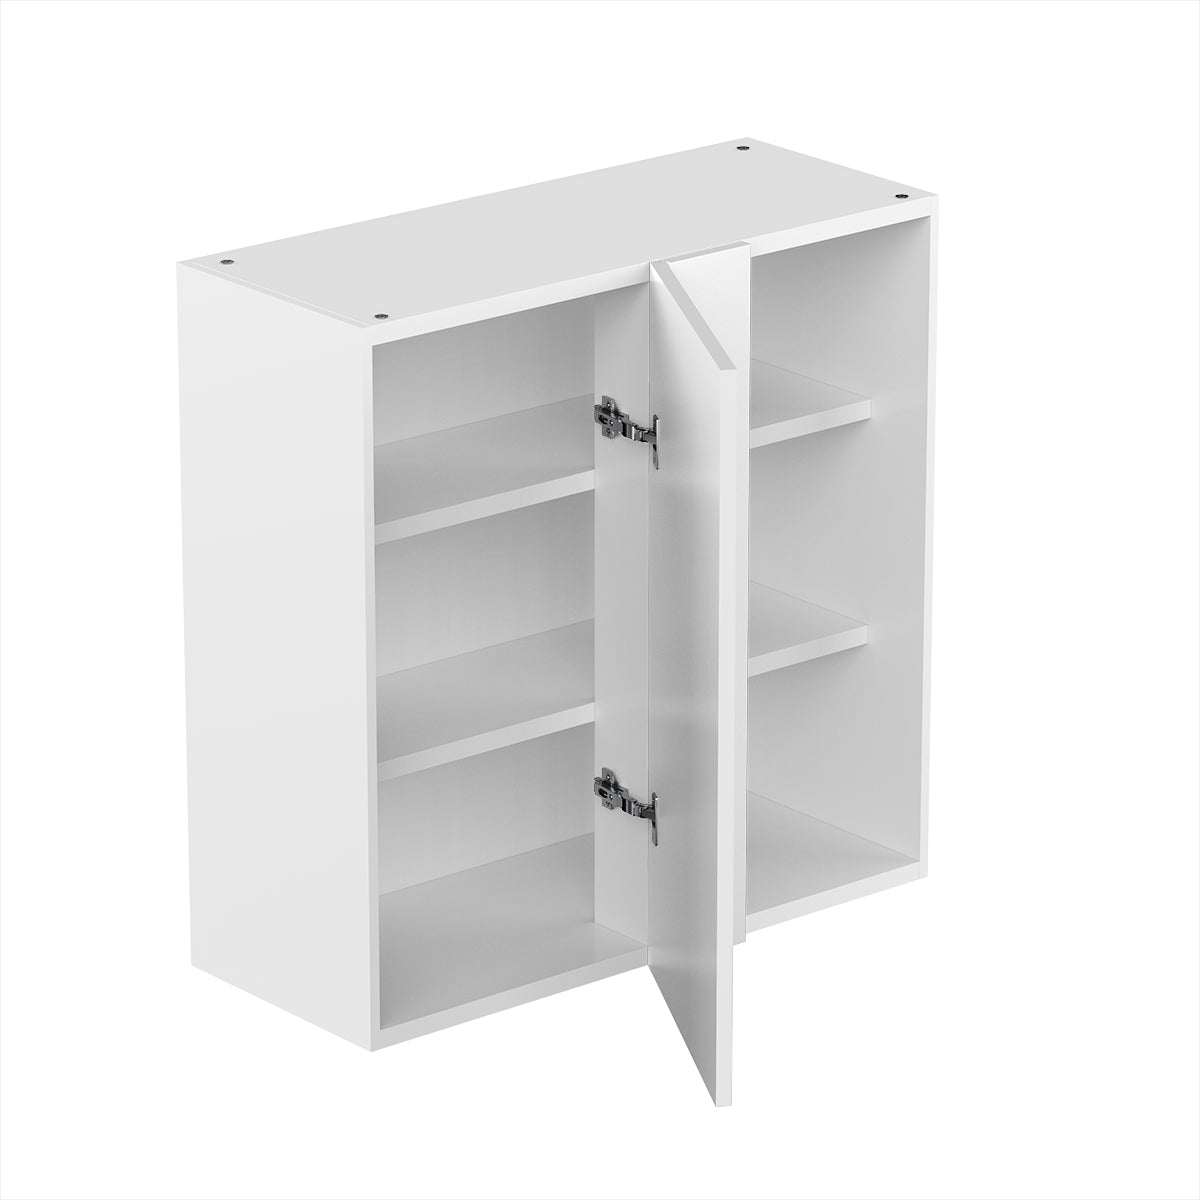 RTA - Glossy White - Single Door Wall Cabinets | 30"W x 30"H x 12"D